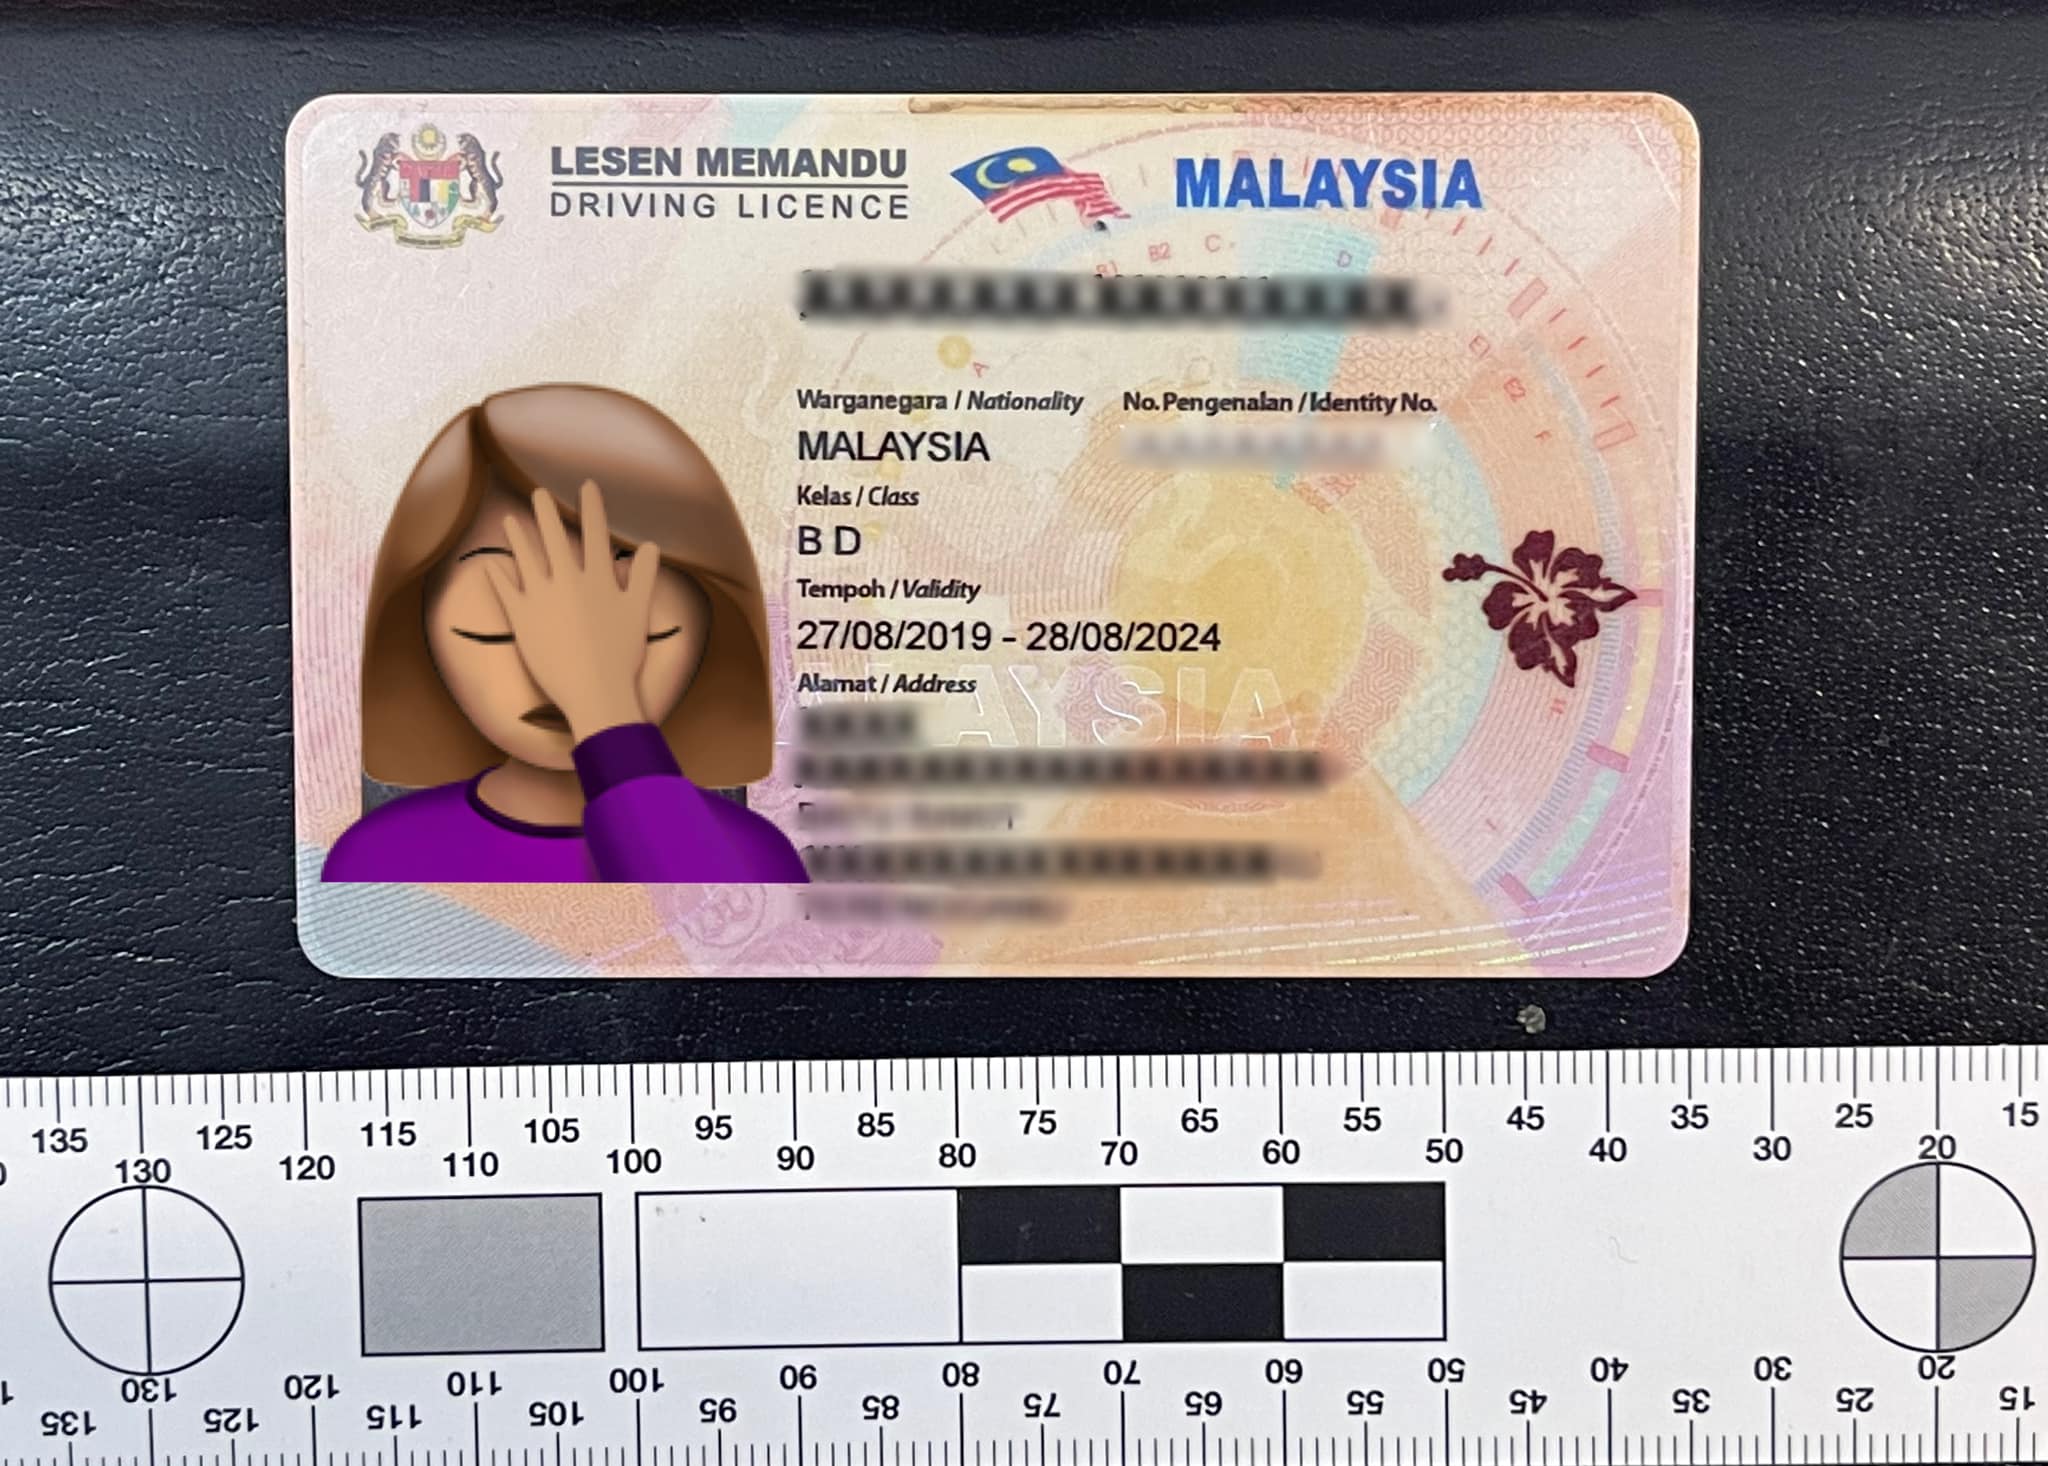 The 26-year-old woman was found to be using a fake Malaysian driver's license. Source: raffic and Highway Patrol Command - NSW Police Force